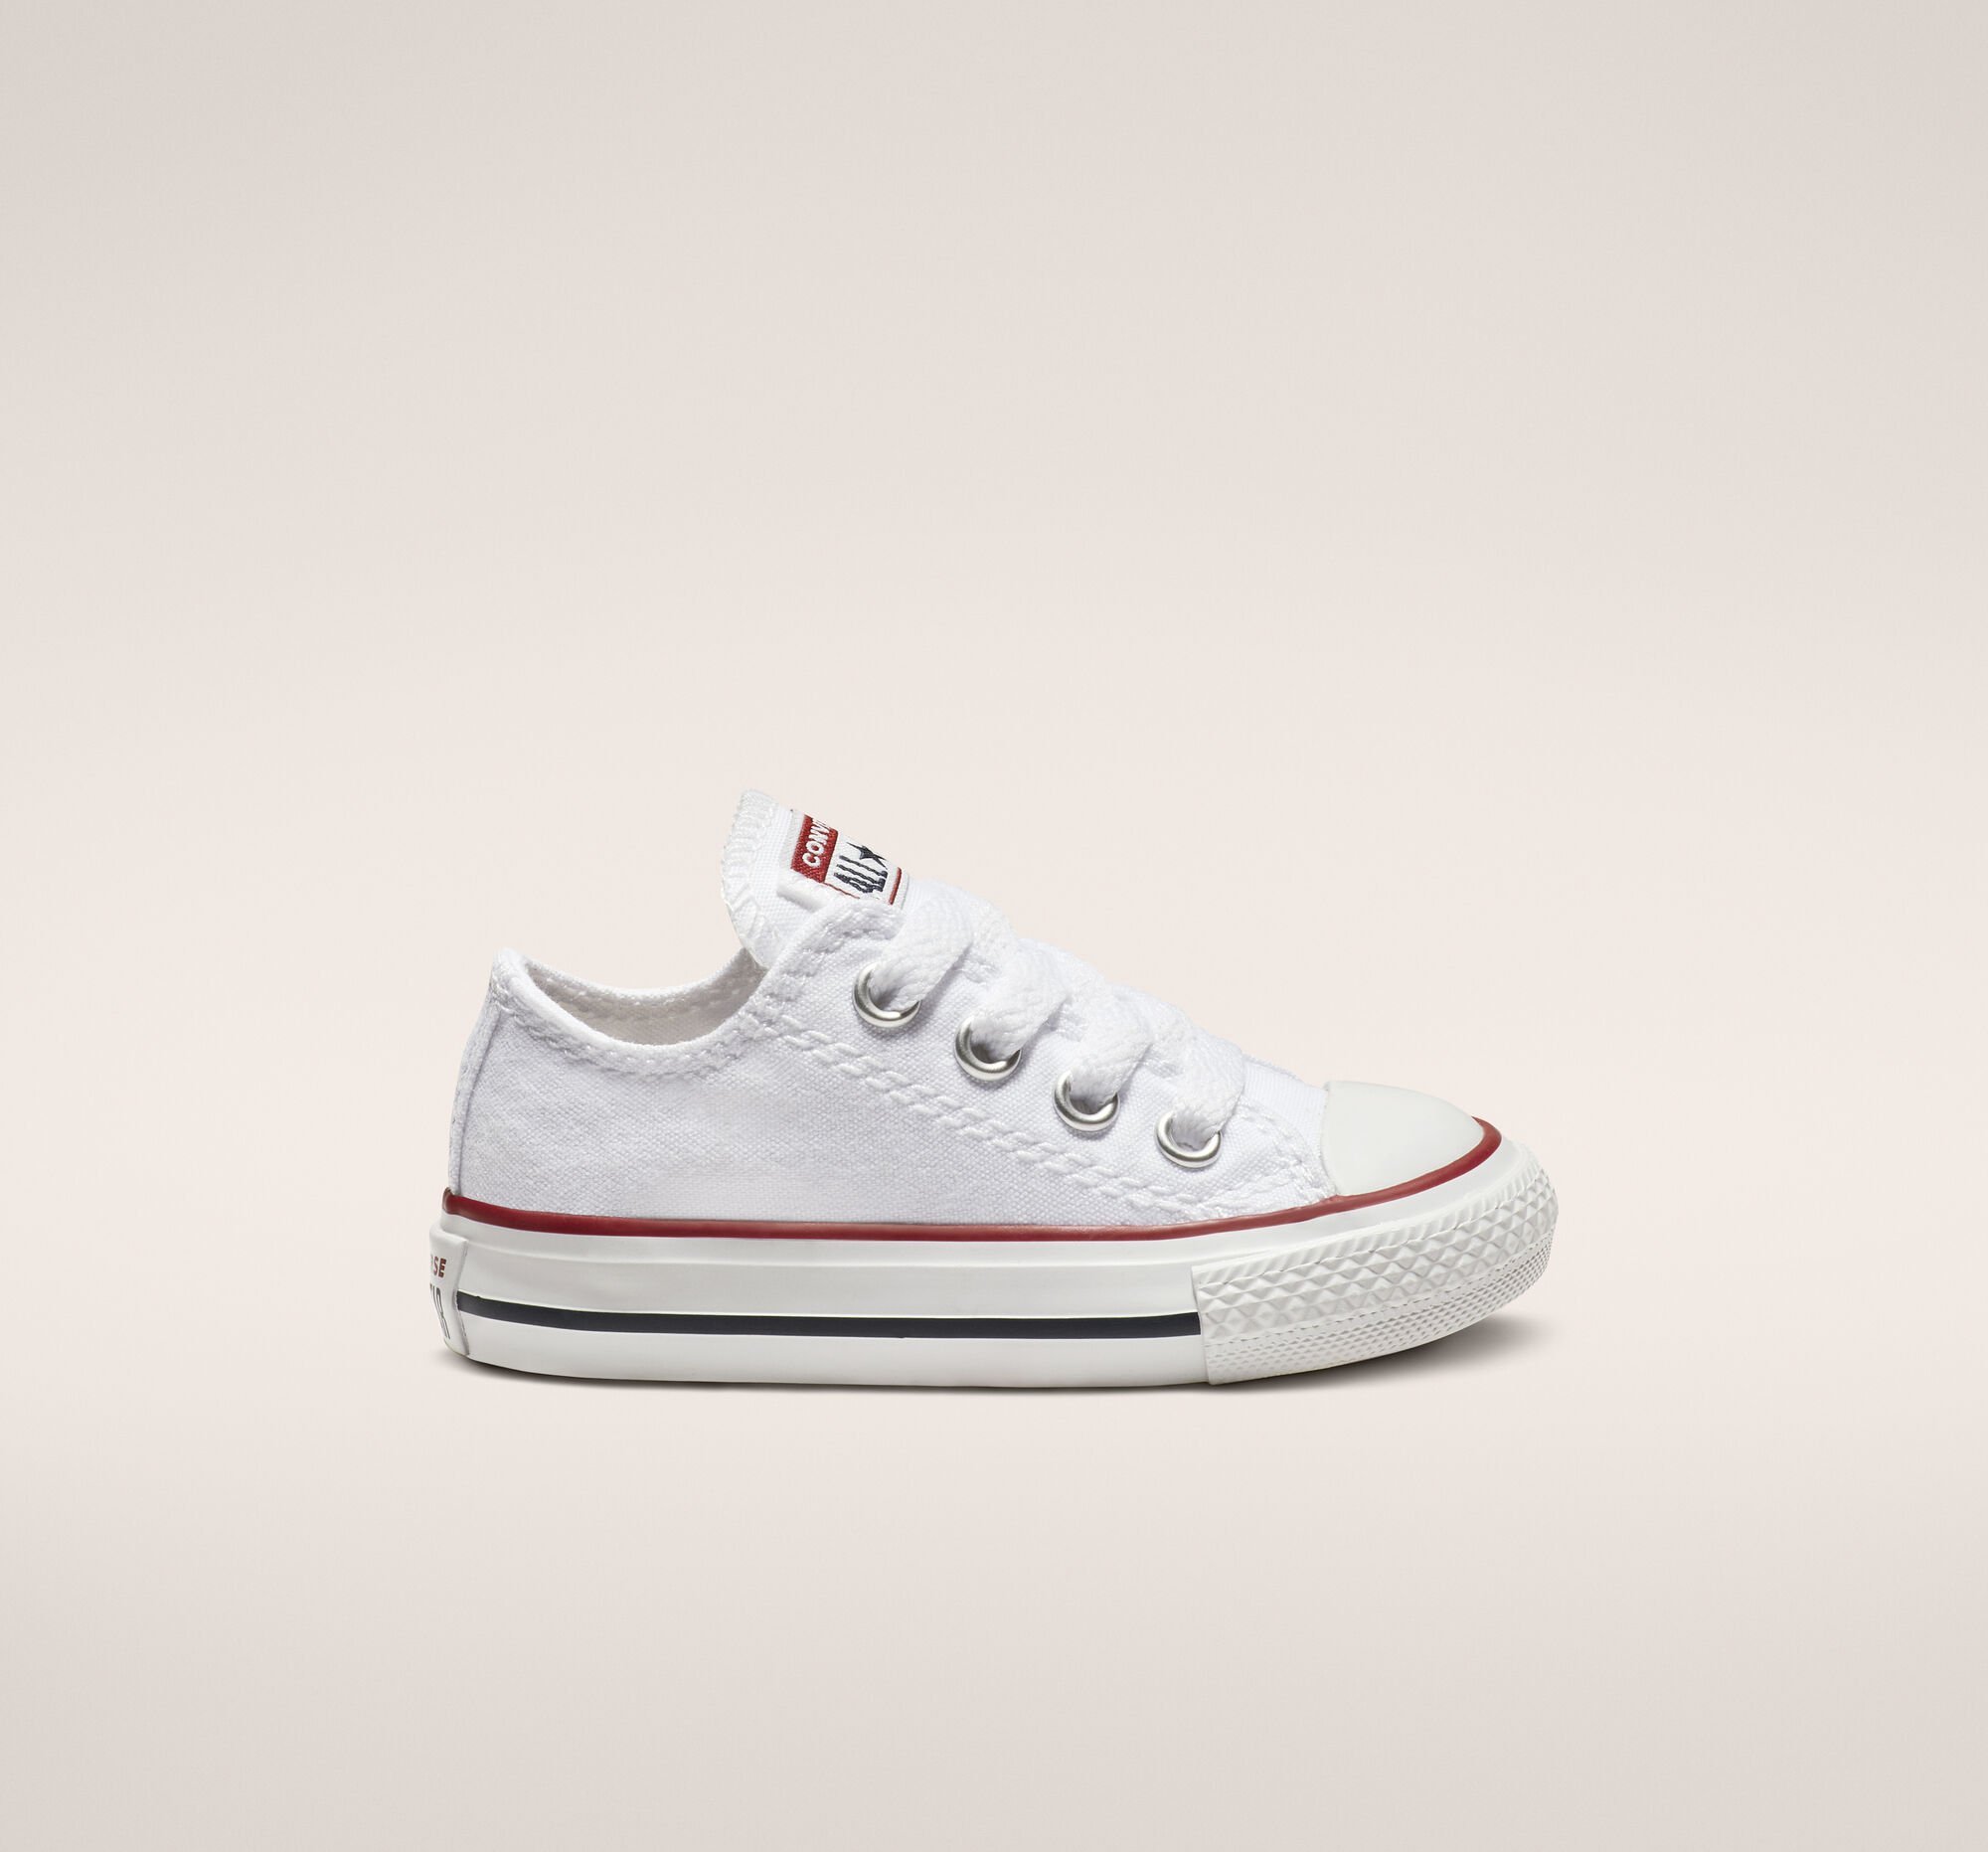 Converse+Chuck+Taylor+All+Star+Classic+Todder+Low+Top+Shoes+in+Optical+White.jpg